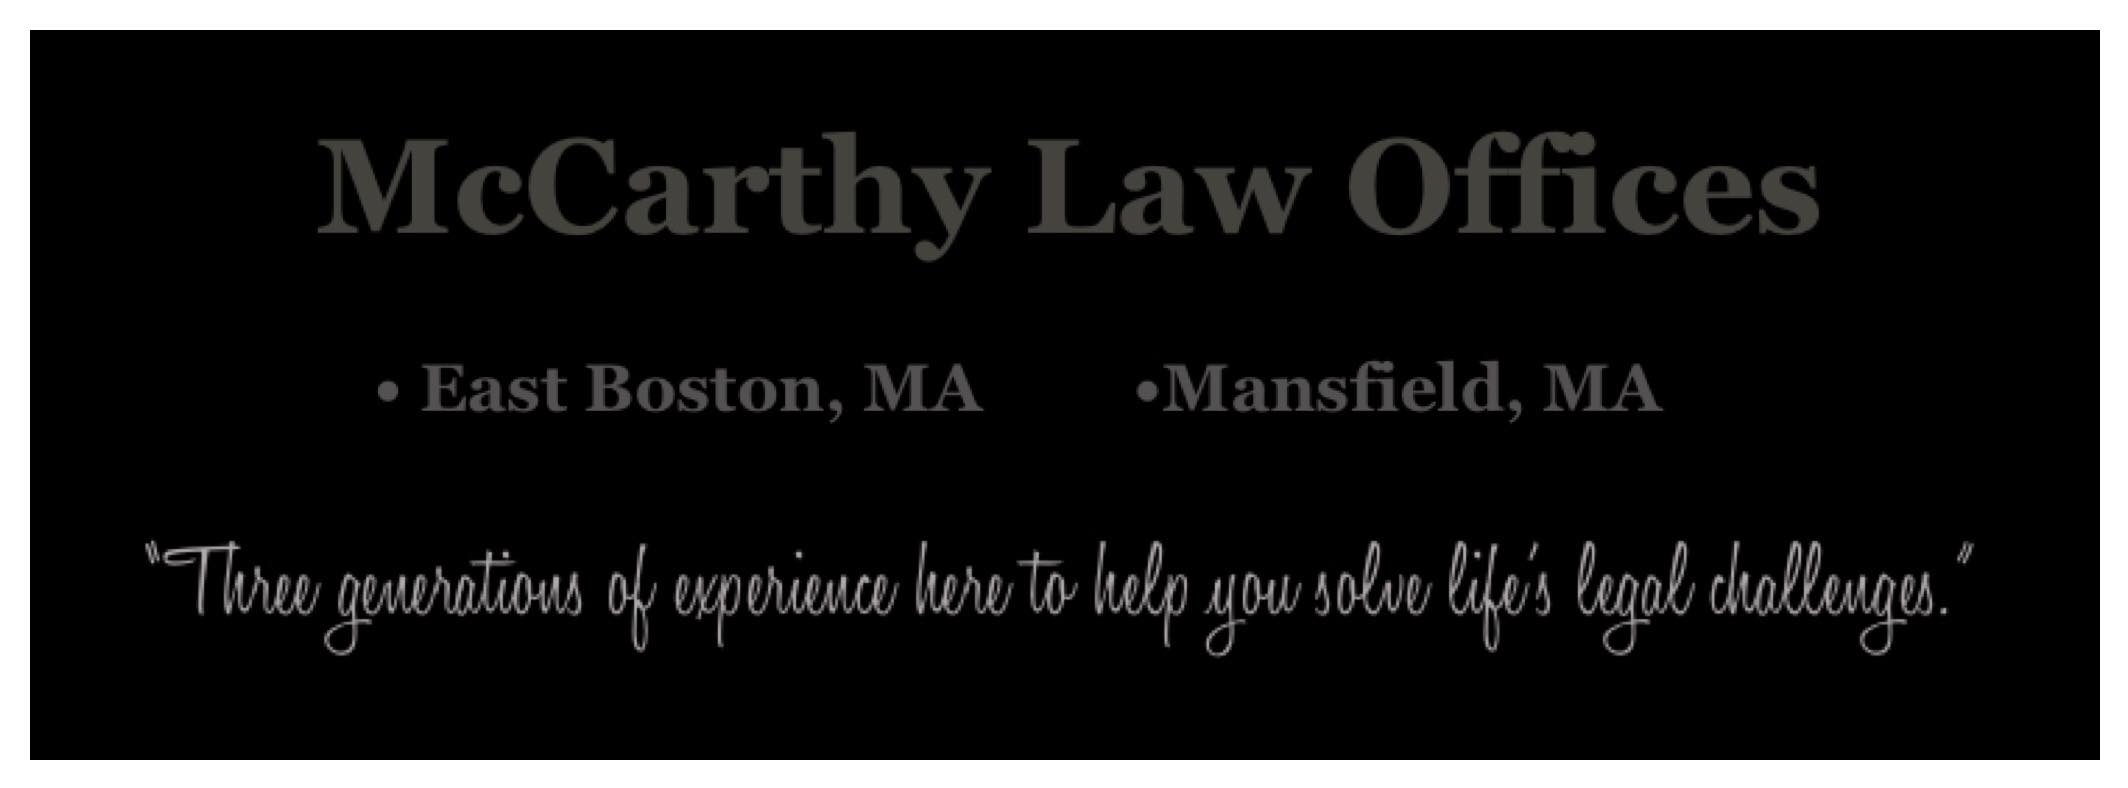 McCarthy Law Offices